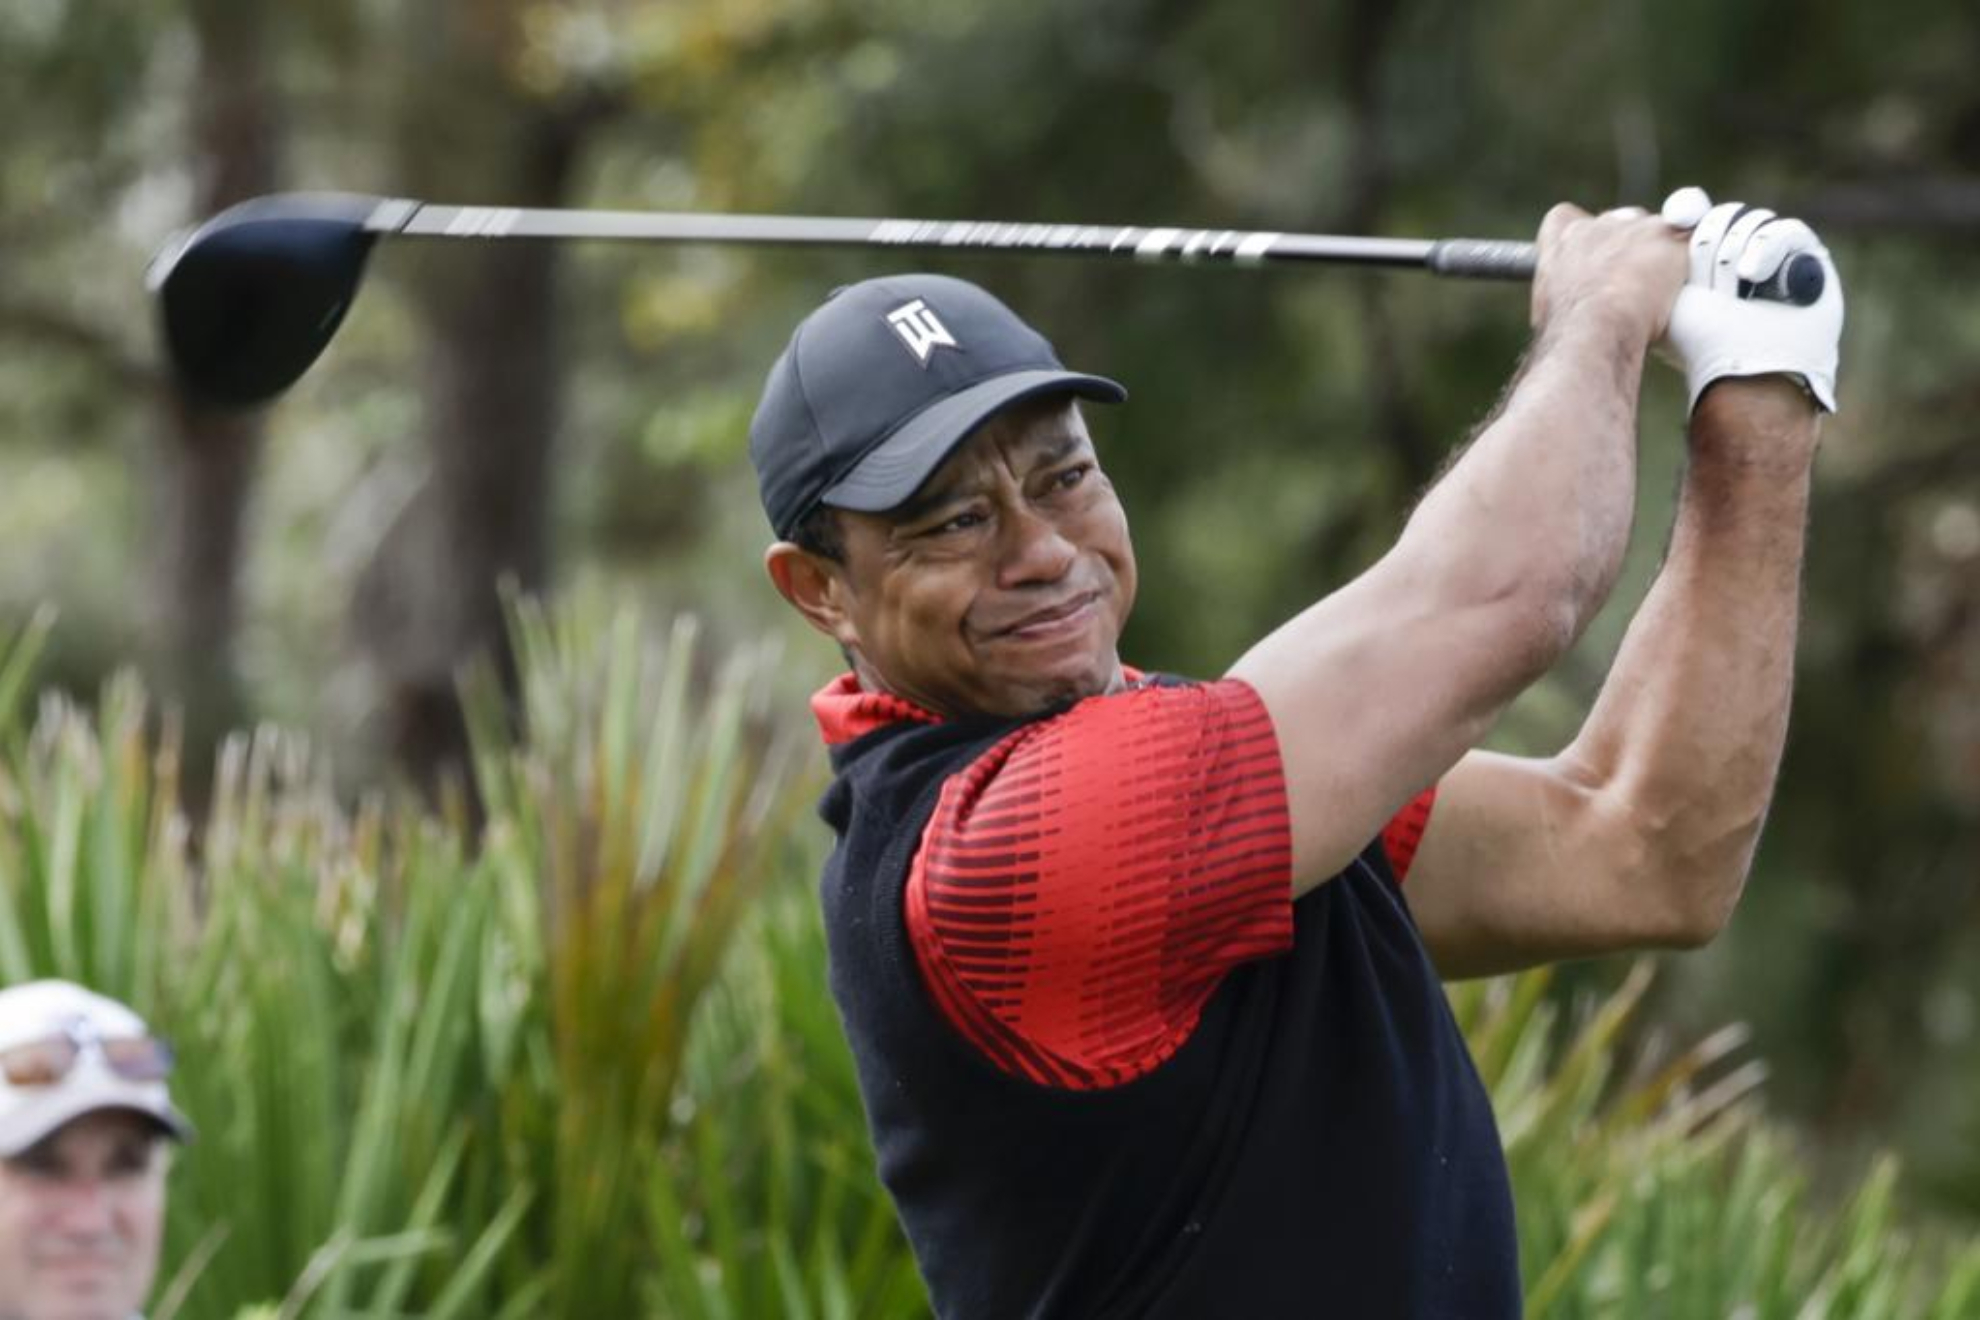 Tiger Woods' spectacular mansion would help anyone get over the hump: What's it like?